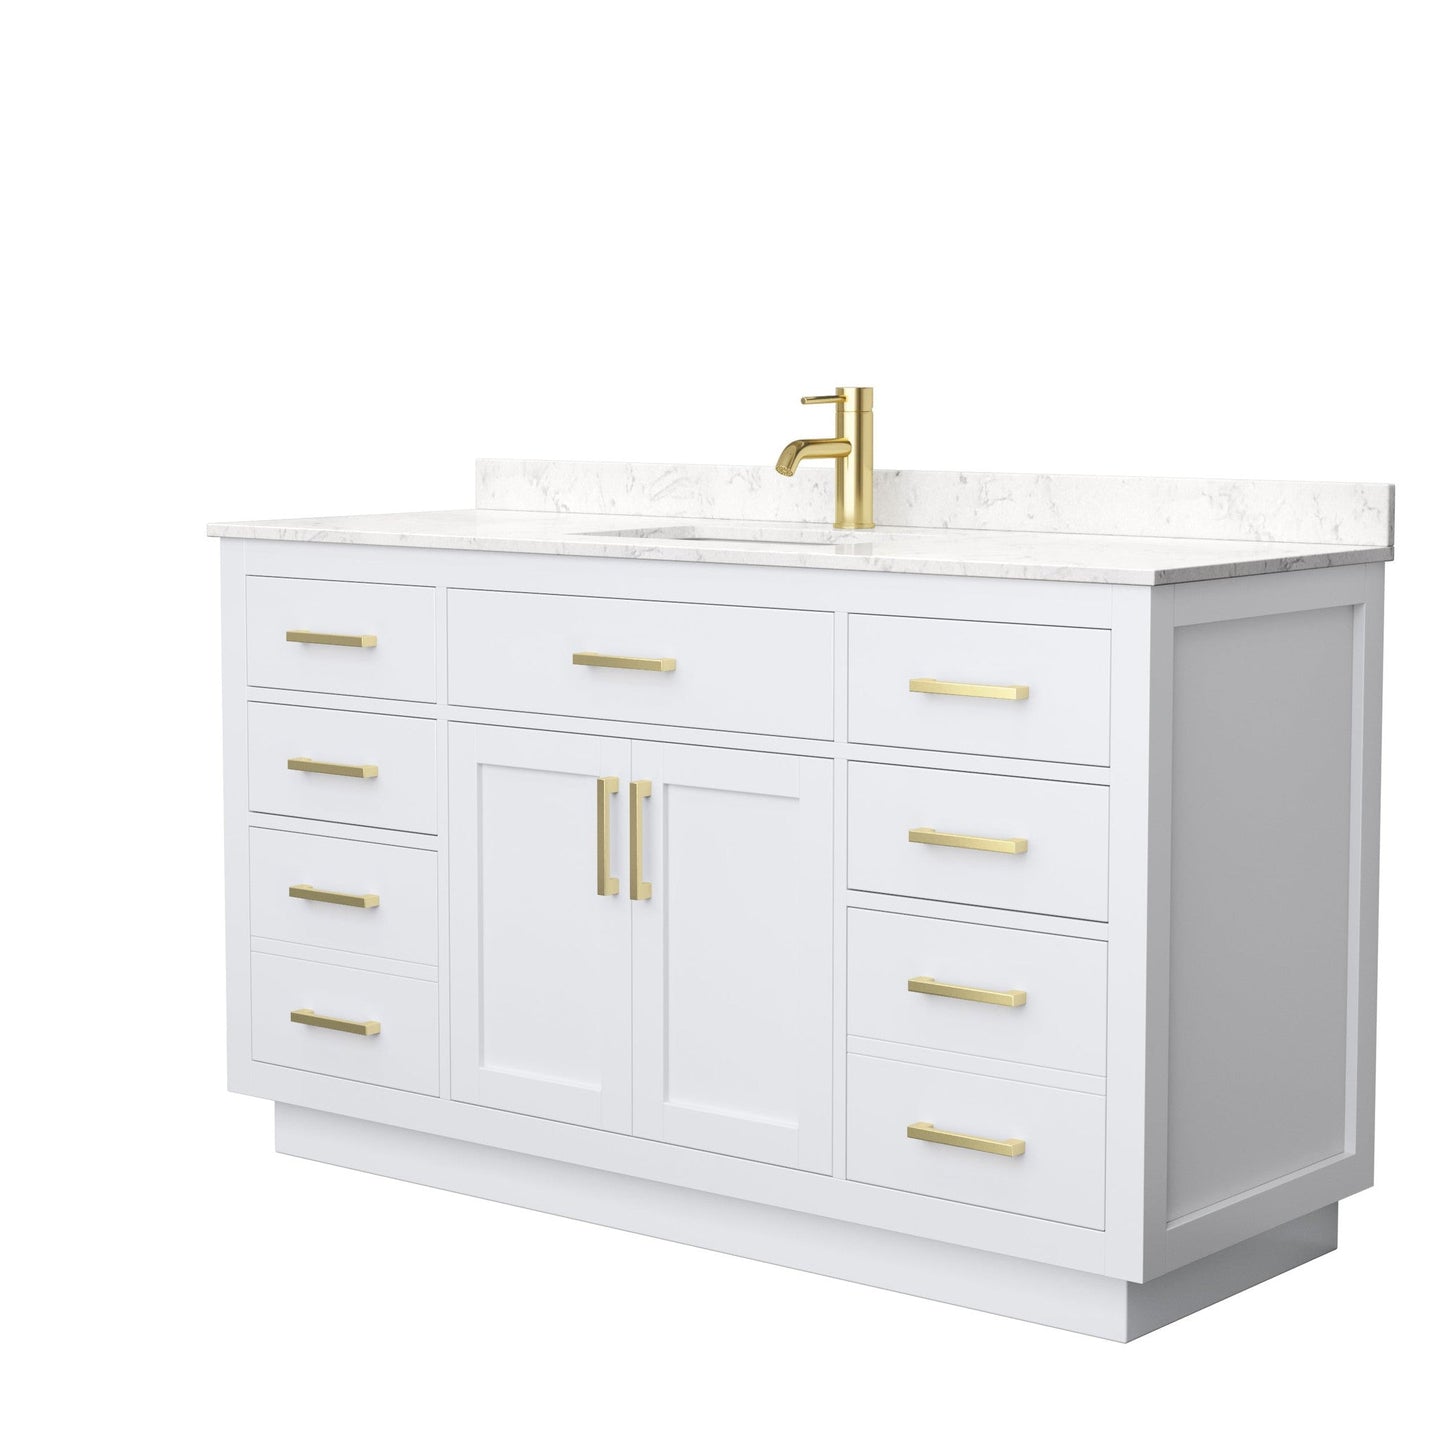 Beckett 60" Single Bathroom Vanity With Toe Kick in White, Carrara Cultured Marble Countertop, Undermount Square Sink, Brushed Gold Trim